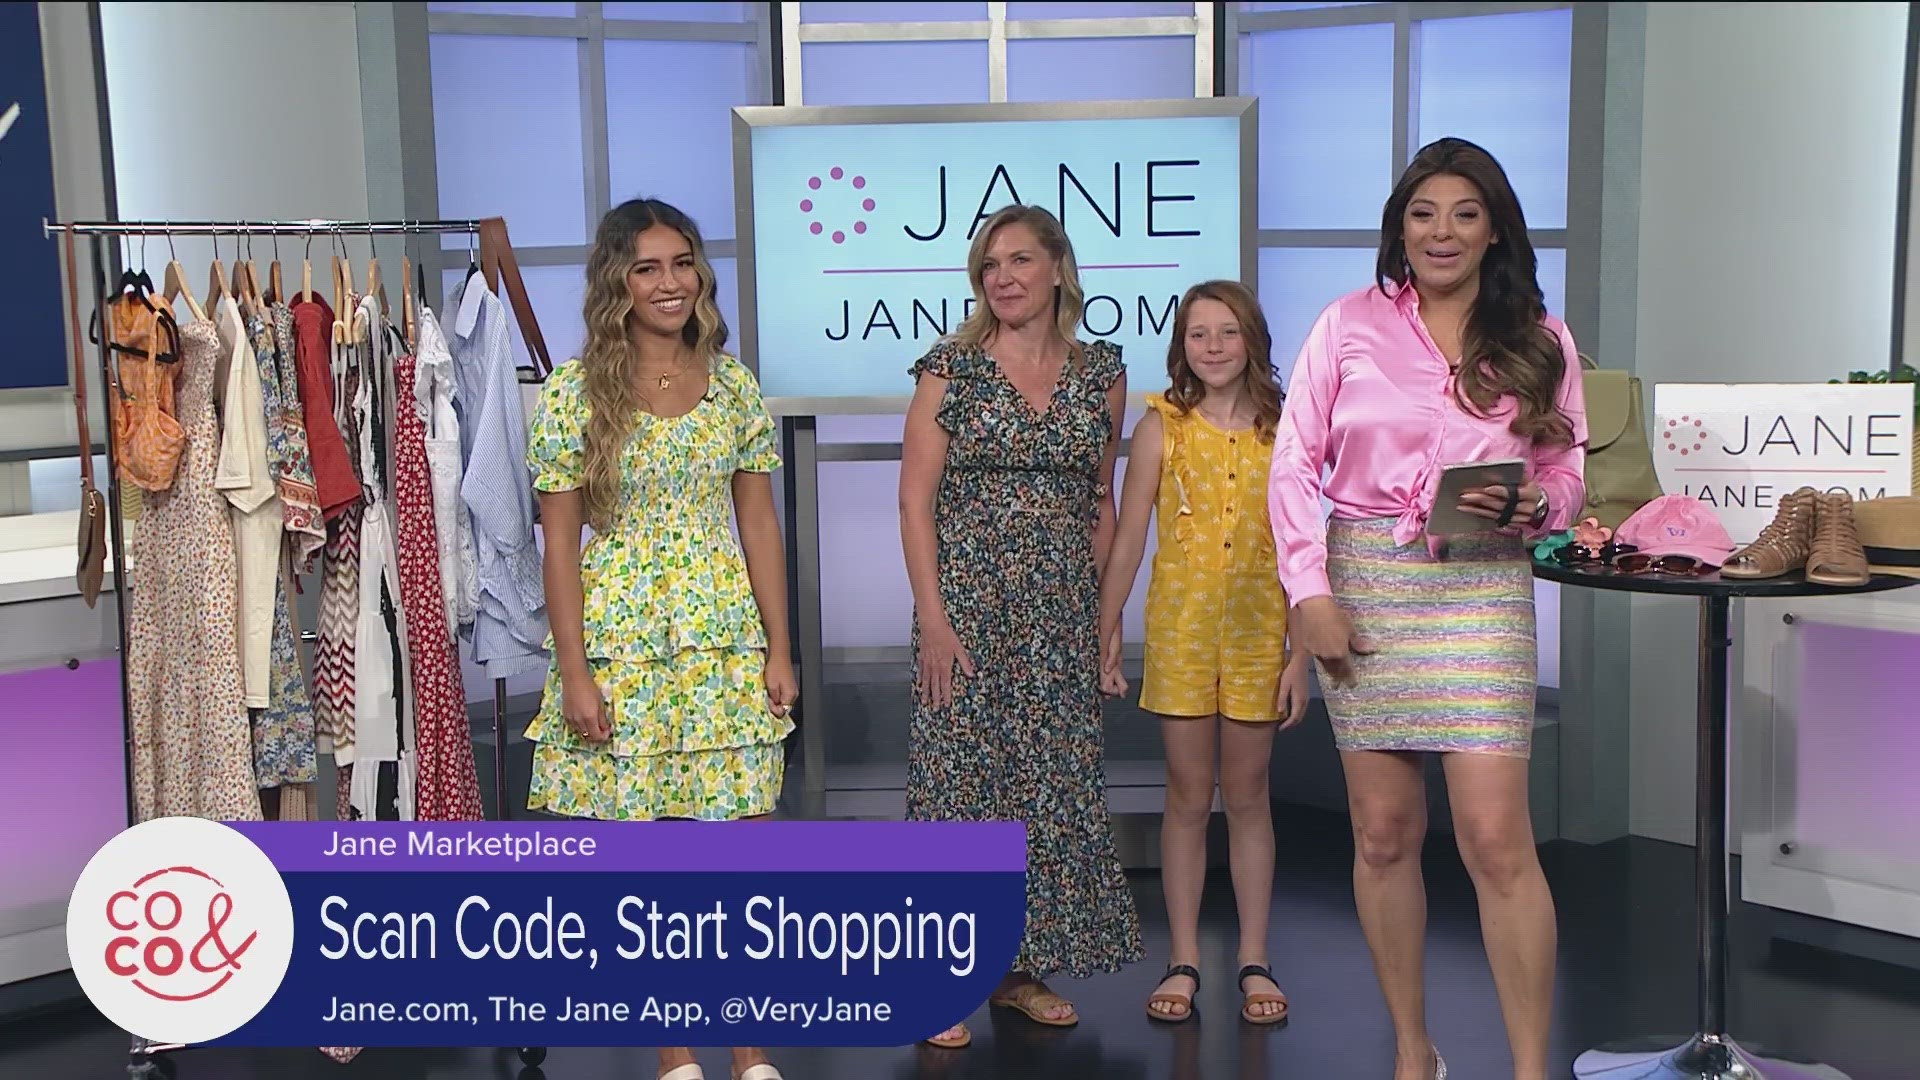 Stay chic this summer with your new best friend, Jane.com Shop fashion and home trends at Jane.com today.